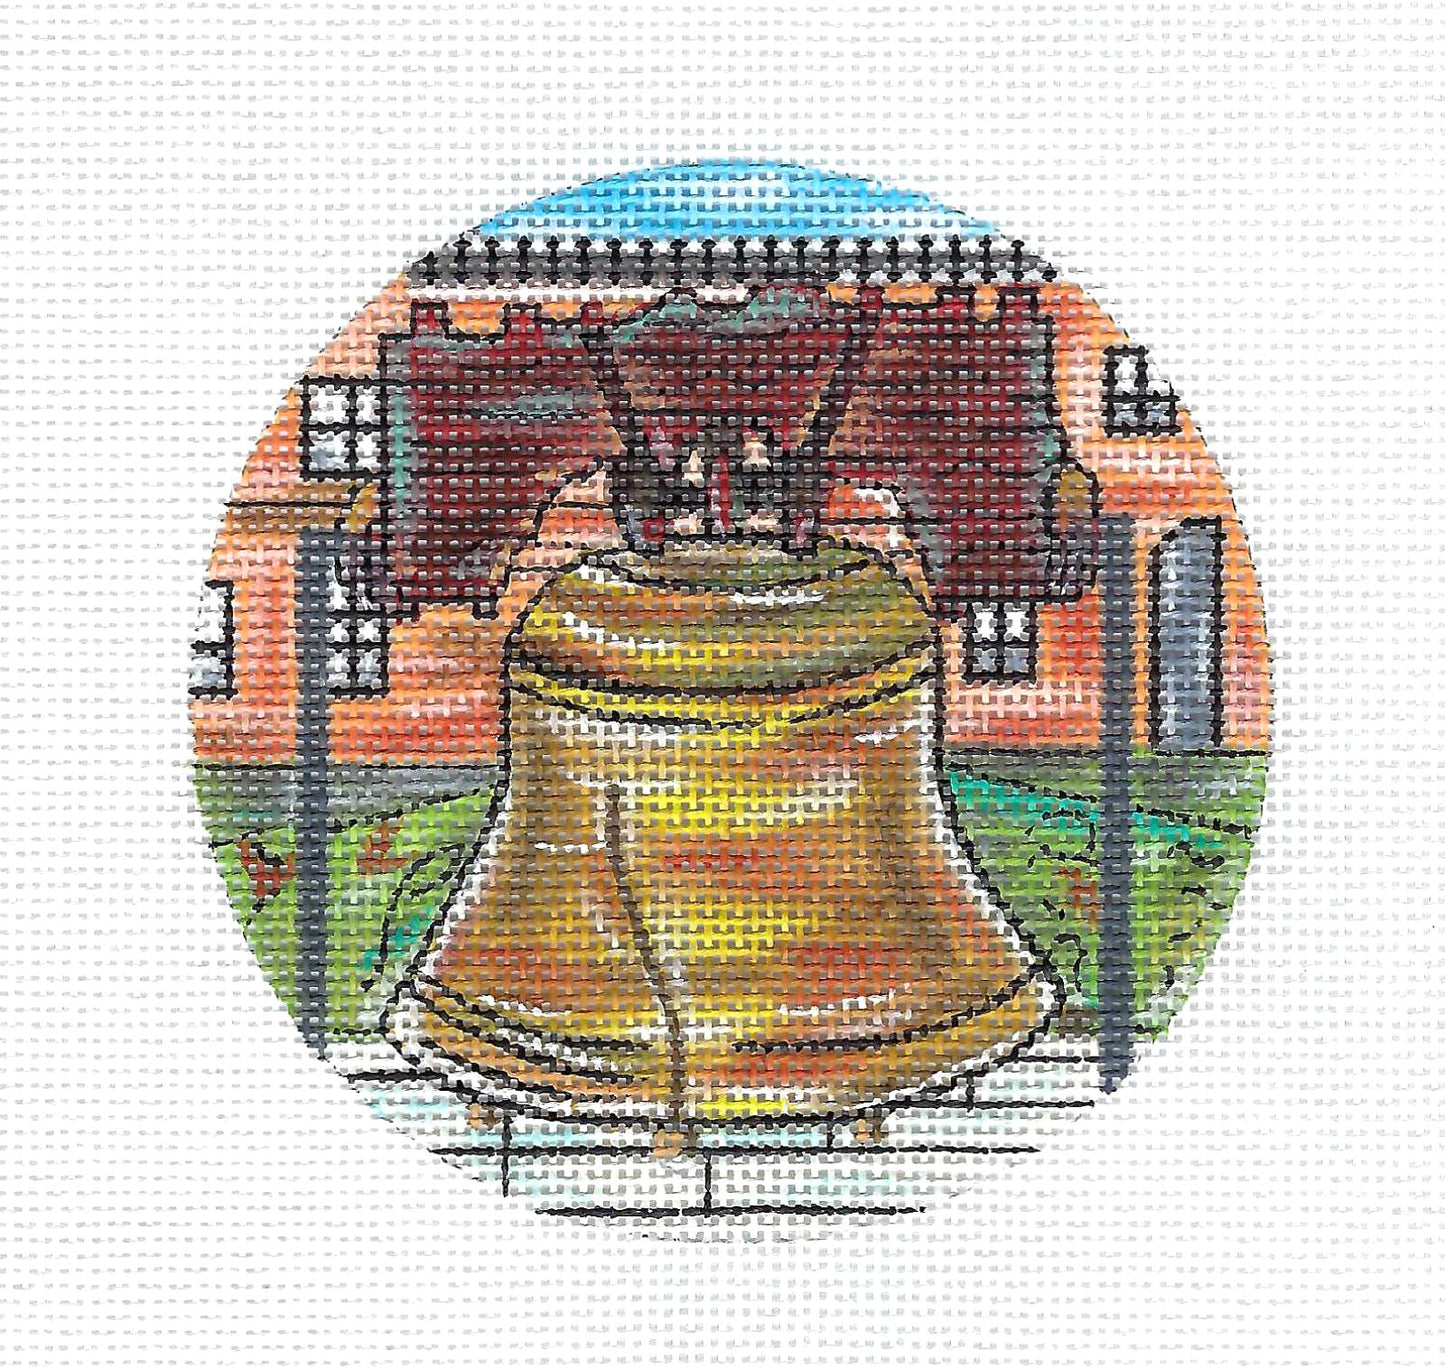 Travel ~ The LIBERTY BELL in Philadelphia, PA Ornament handpainted 18 mesh Needlepoint Canvas by Juliemar